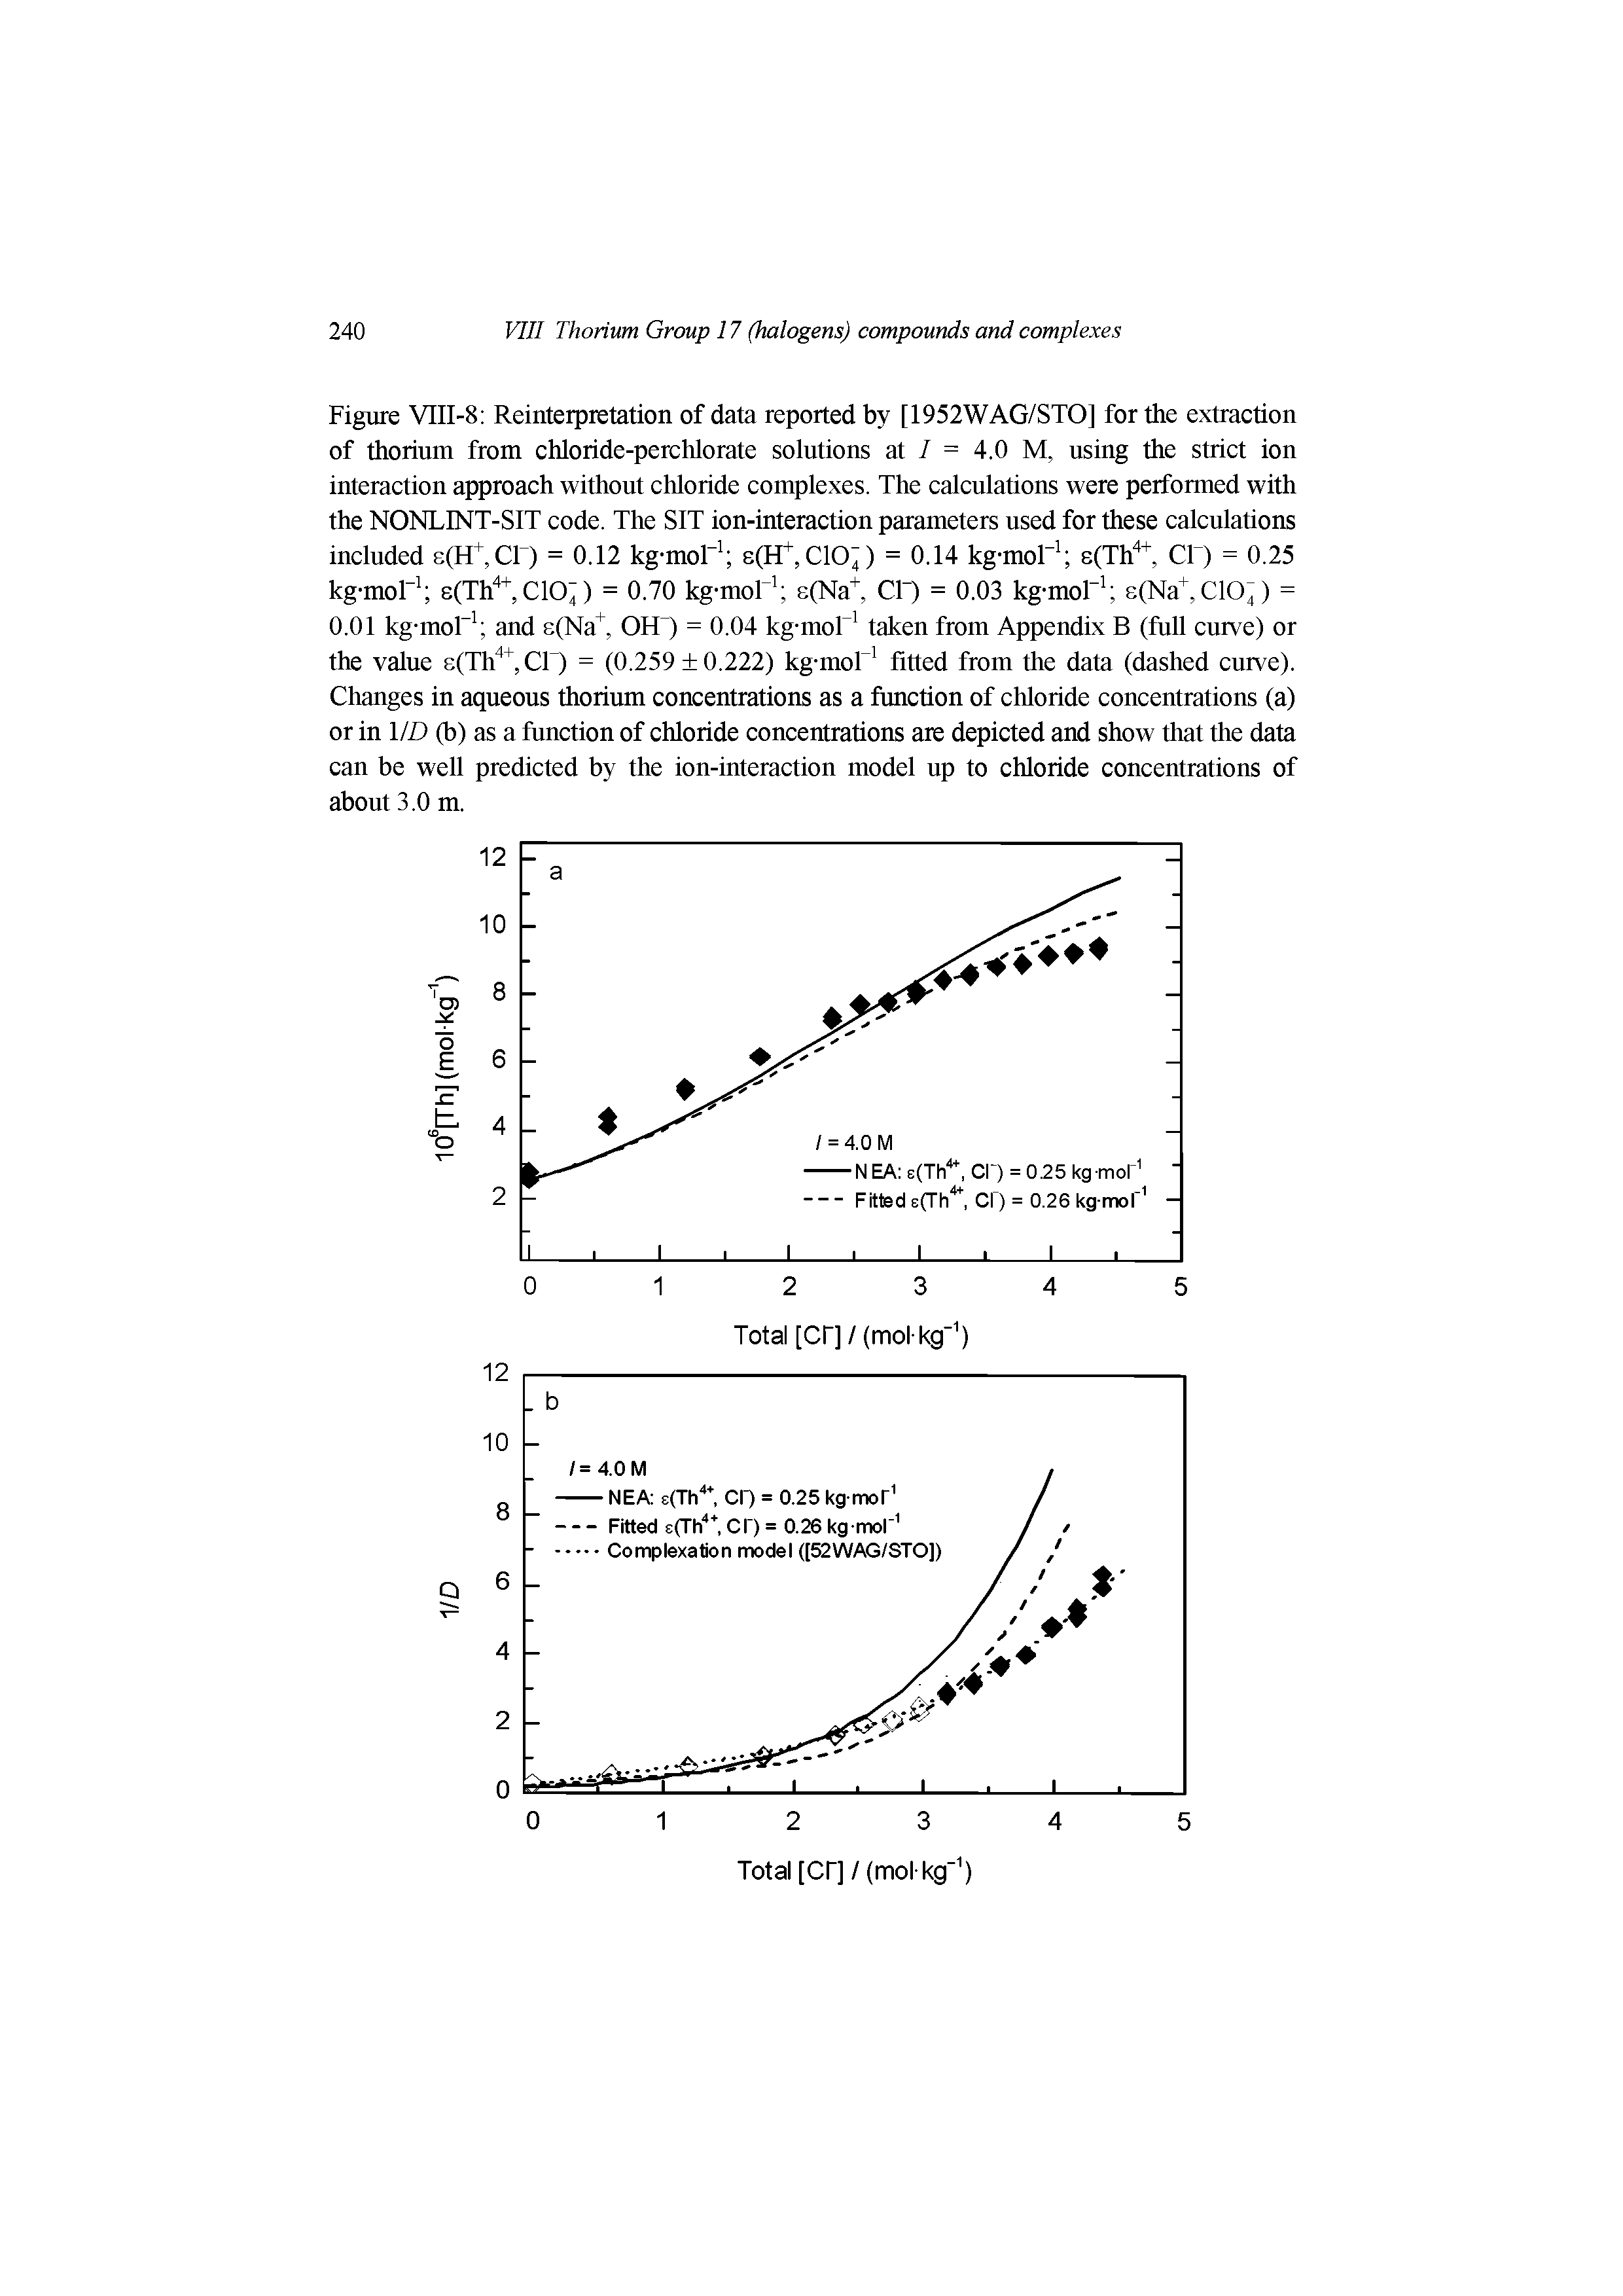 Figure VIII-8 Reinterpretation of data reported by [1952WAG/STO] for the extraction of thorium from chloride-perchlorate solutions at / = 4.0 M, using the strict ion interaction approach without chloride complexes. The calculations were performed with the NONLINT-SIT code. The SIT ion-interaction parameters used for these calculations included s(H+Cl) = 0.12 kg-mol s(H+,C10 ) = 0.14 kg-mol s(Th + Cl) = 0.25 kg-moT s(Th +CIO") = 0.70 kg-mol8(Na+ CF) = 0.03 kg-mol e(Na+,C10 ) = 0.01 kg-moF and e(Na, OH ) = 0.04 kg-mol taken from Appendix B (full curve) or the value 8(Th", Cr) = (0.259 + 0.222) kg-mol fitted from the data (dashed curve). Changes in aqueous thorium concentrations as a function of chloride concentrations (a) or in HD (b) as a function of chloride concentrations are depicted and show that the data can be well predicted by the ion-interaction model up to chloride concentrations of about 3.0 m.